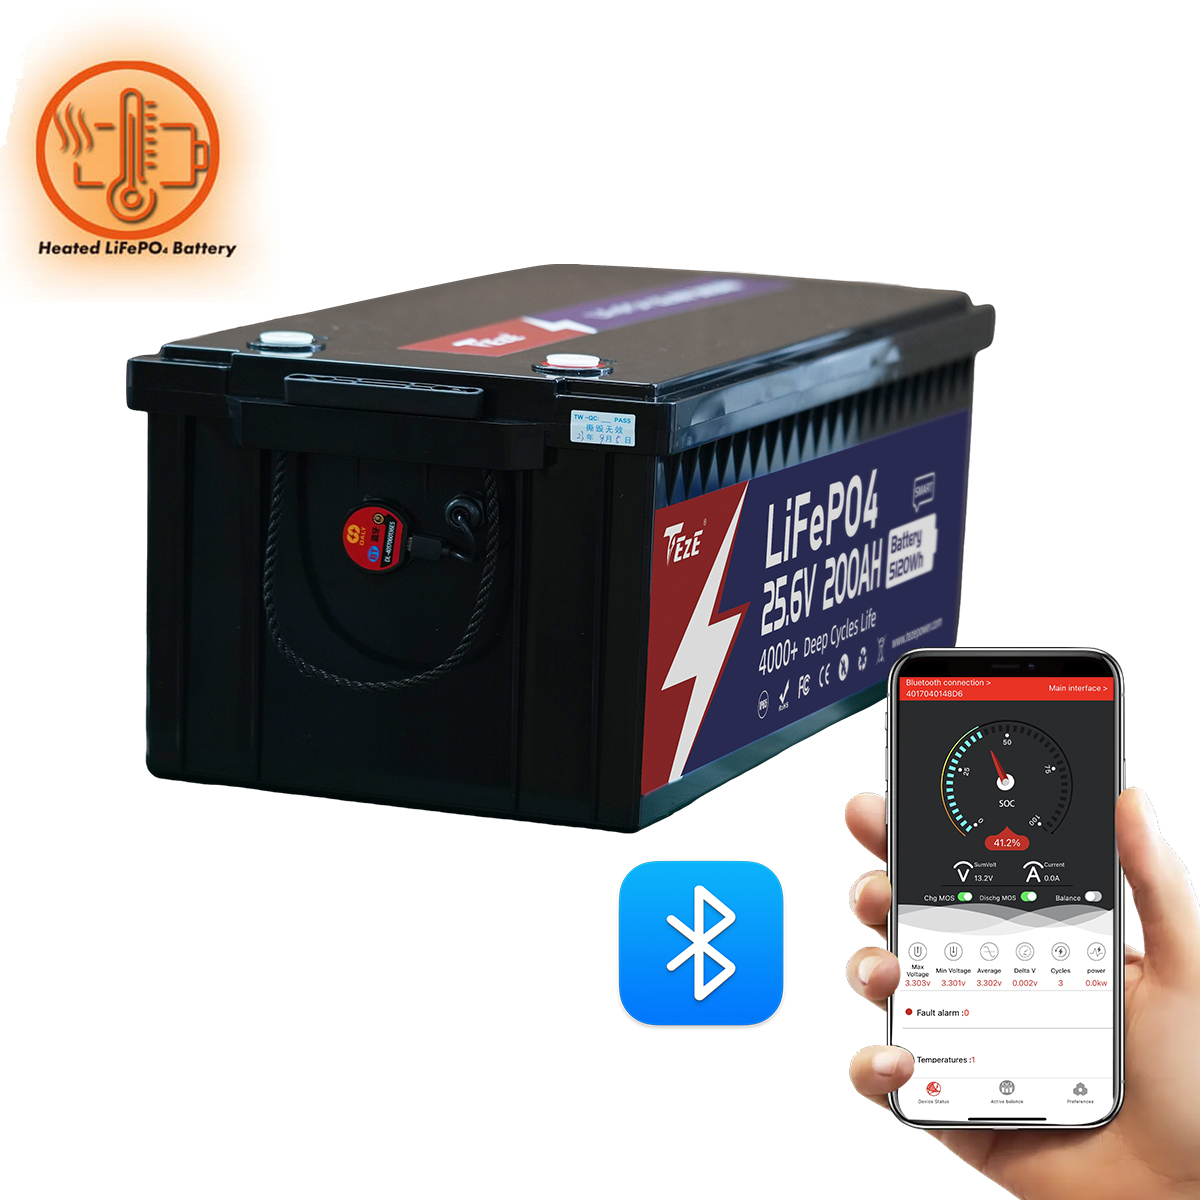 NEW-TezePower 24V200Ah LiFePO4 Battery with Bluetooth, RS485/RS232/CAN Communication Ports, Self-heating and Active Balancer, Built-in 200A Daly BMS (Bluetooth External Version)-TezePower